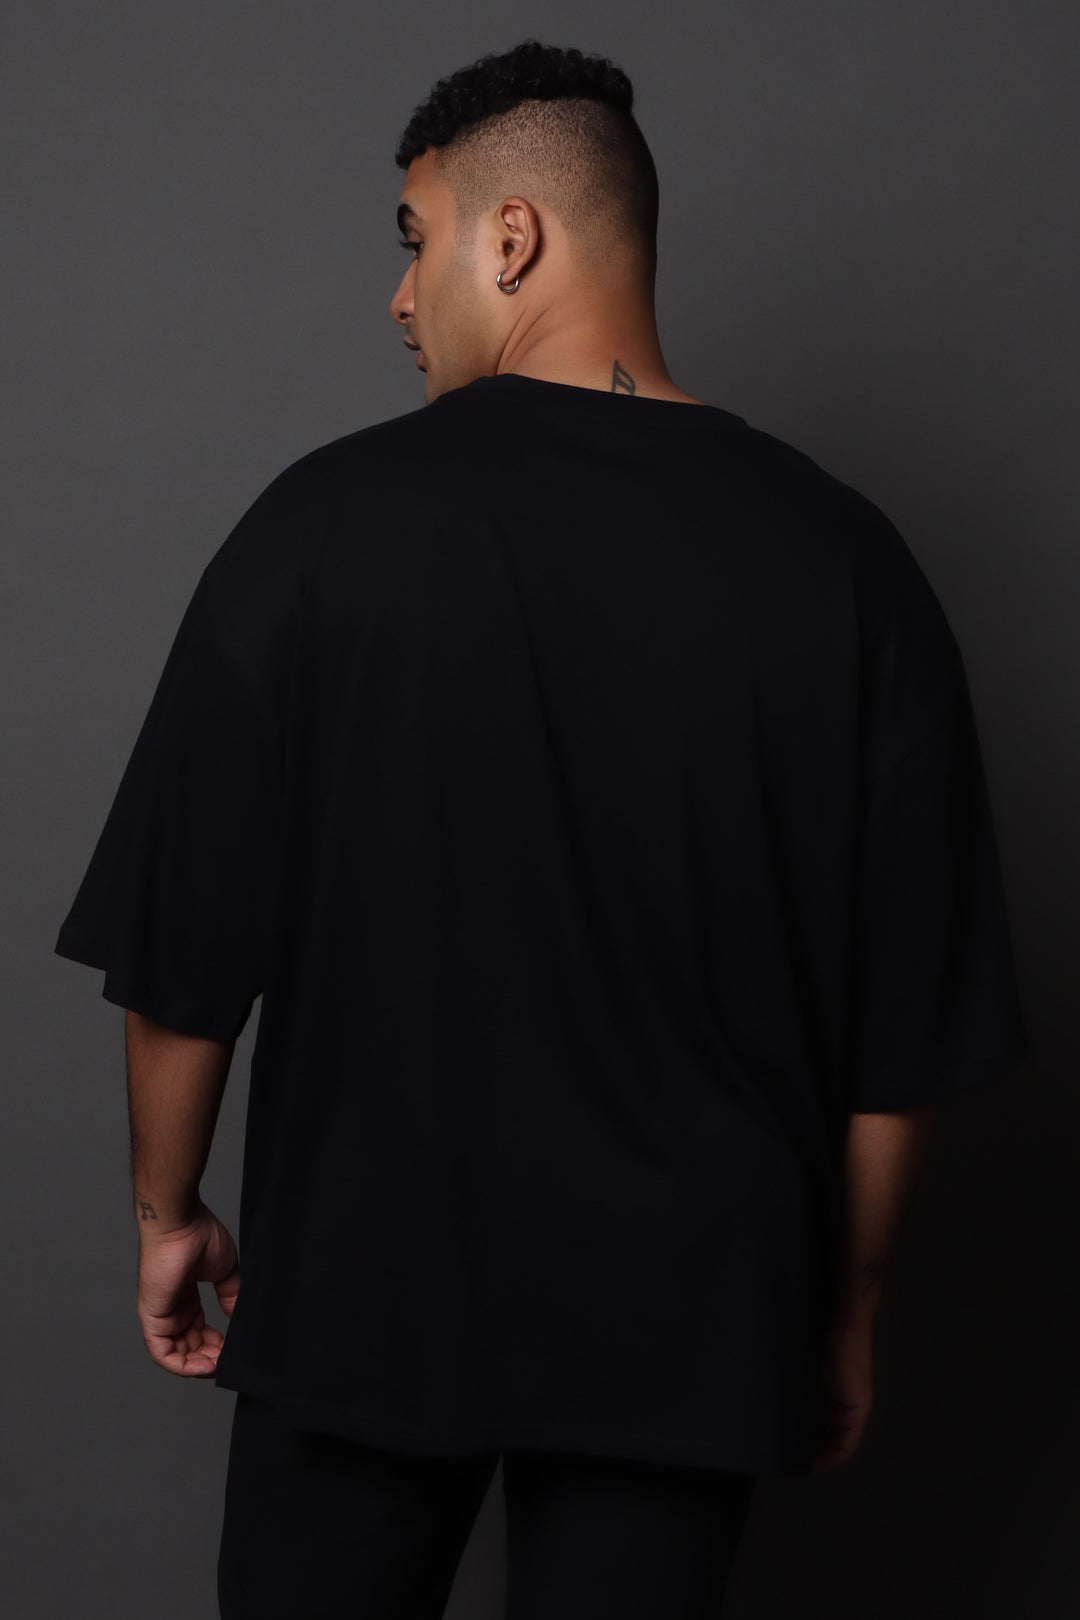 Printed Oversized Tee - MEN'S PRINTED OVER SIZE TEE#68